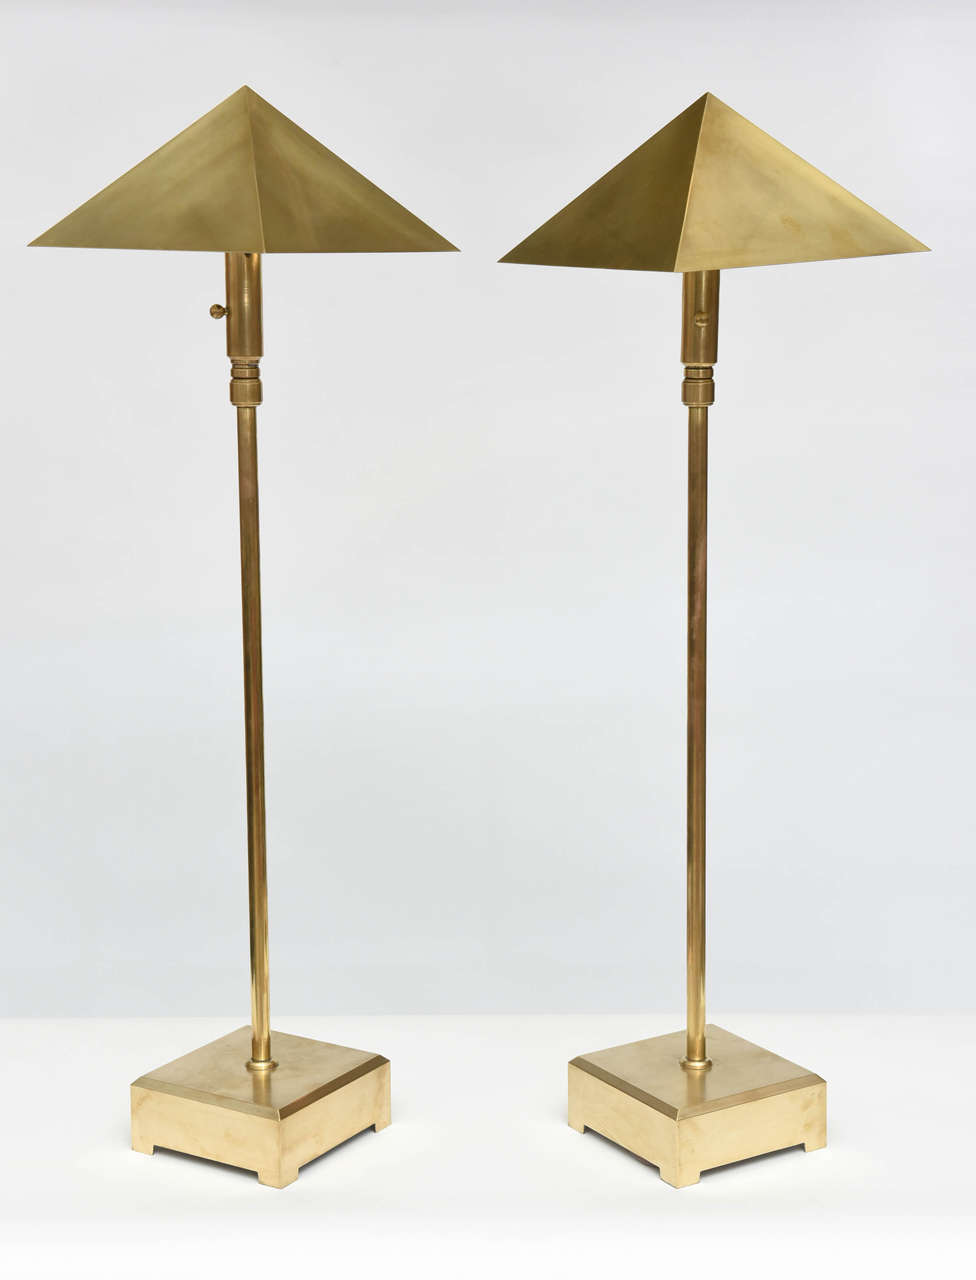 The pyramidal shade above an adjustable pole to extend or shorten the overall length, on a square plinth with bracket feet 40.5 without extension, extents to 64